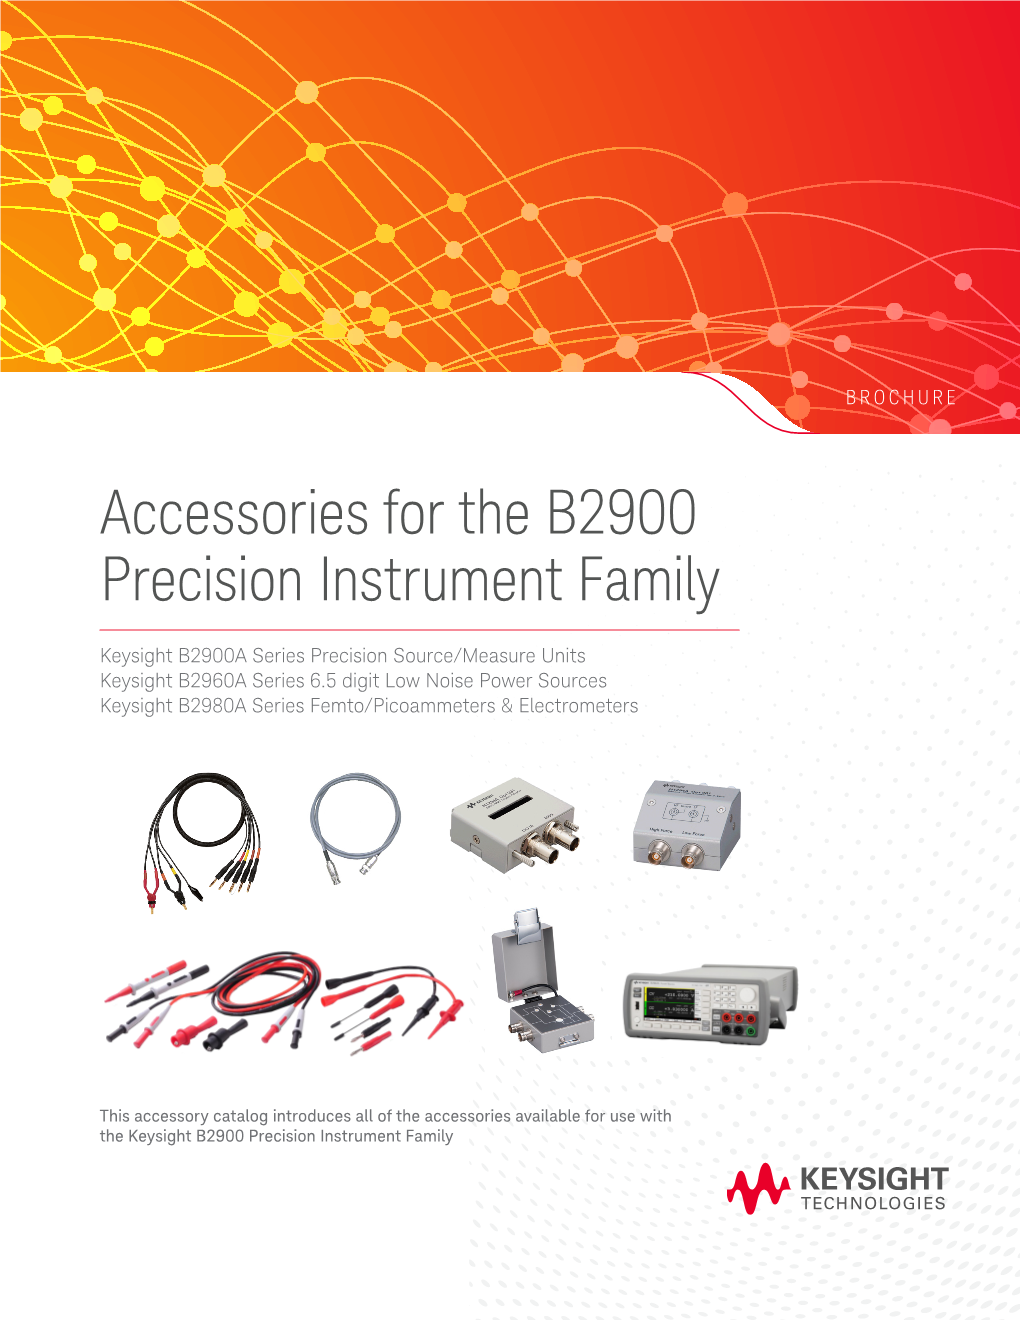 Accessories for the B2900 Precision Instrument Family